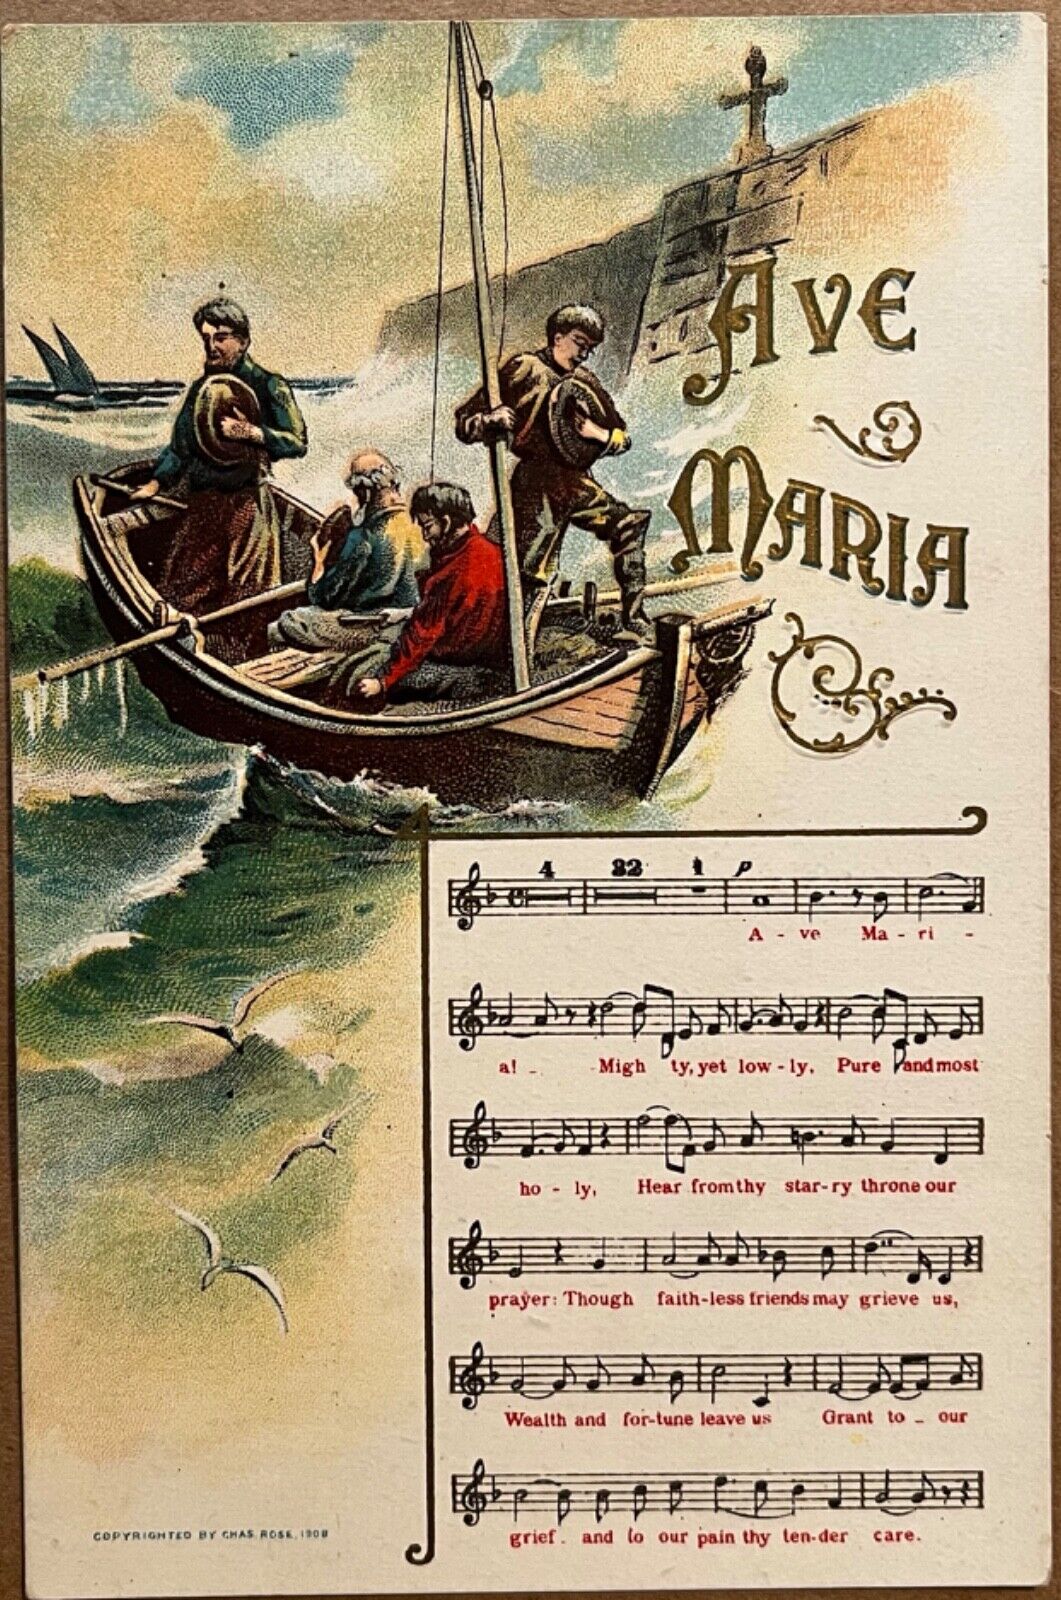 Men in Boat Ave Maria Religious Hymnal Sheet Music Song Vintage Postcard 1908